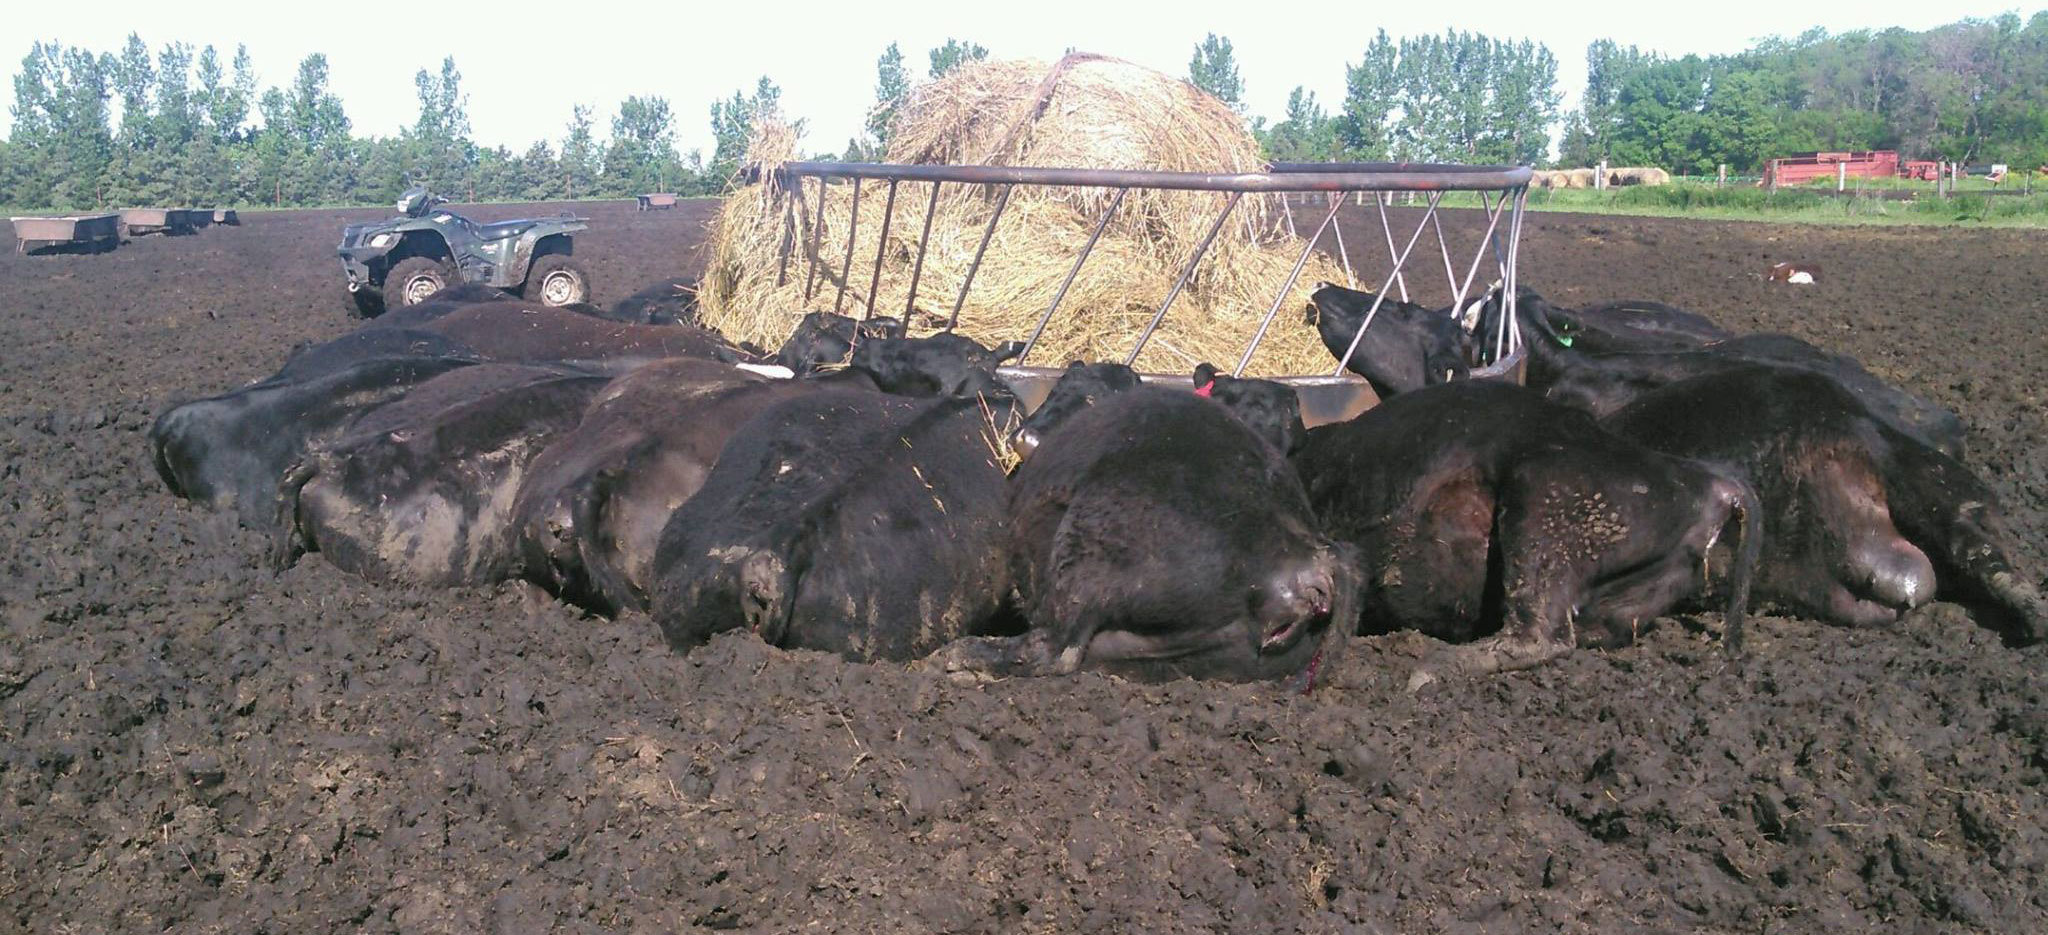 A single bolt of lightning killed 21 cows next to a metal bale feeder. 